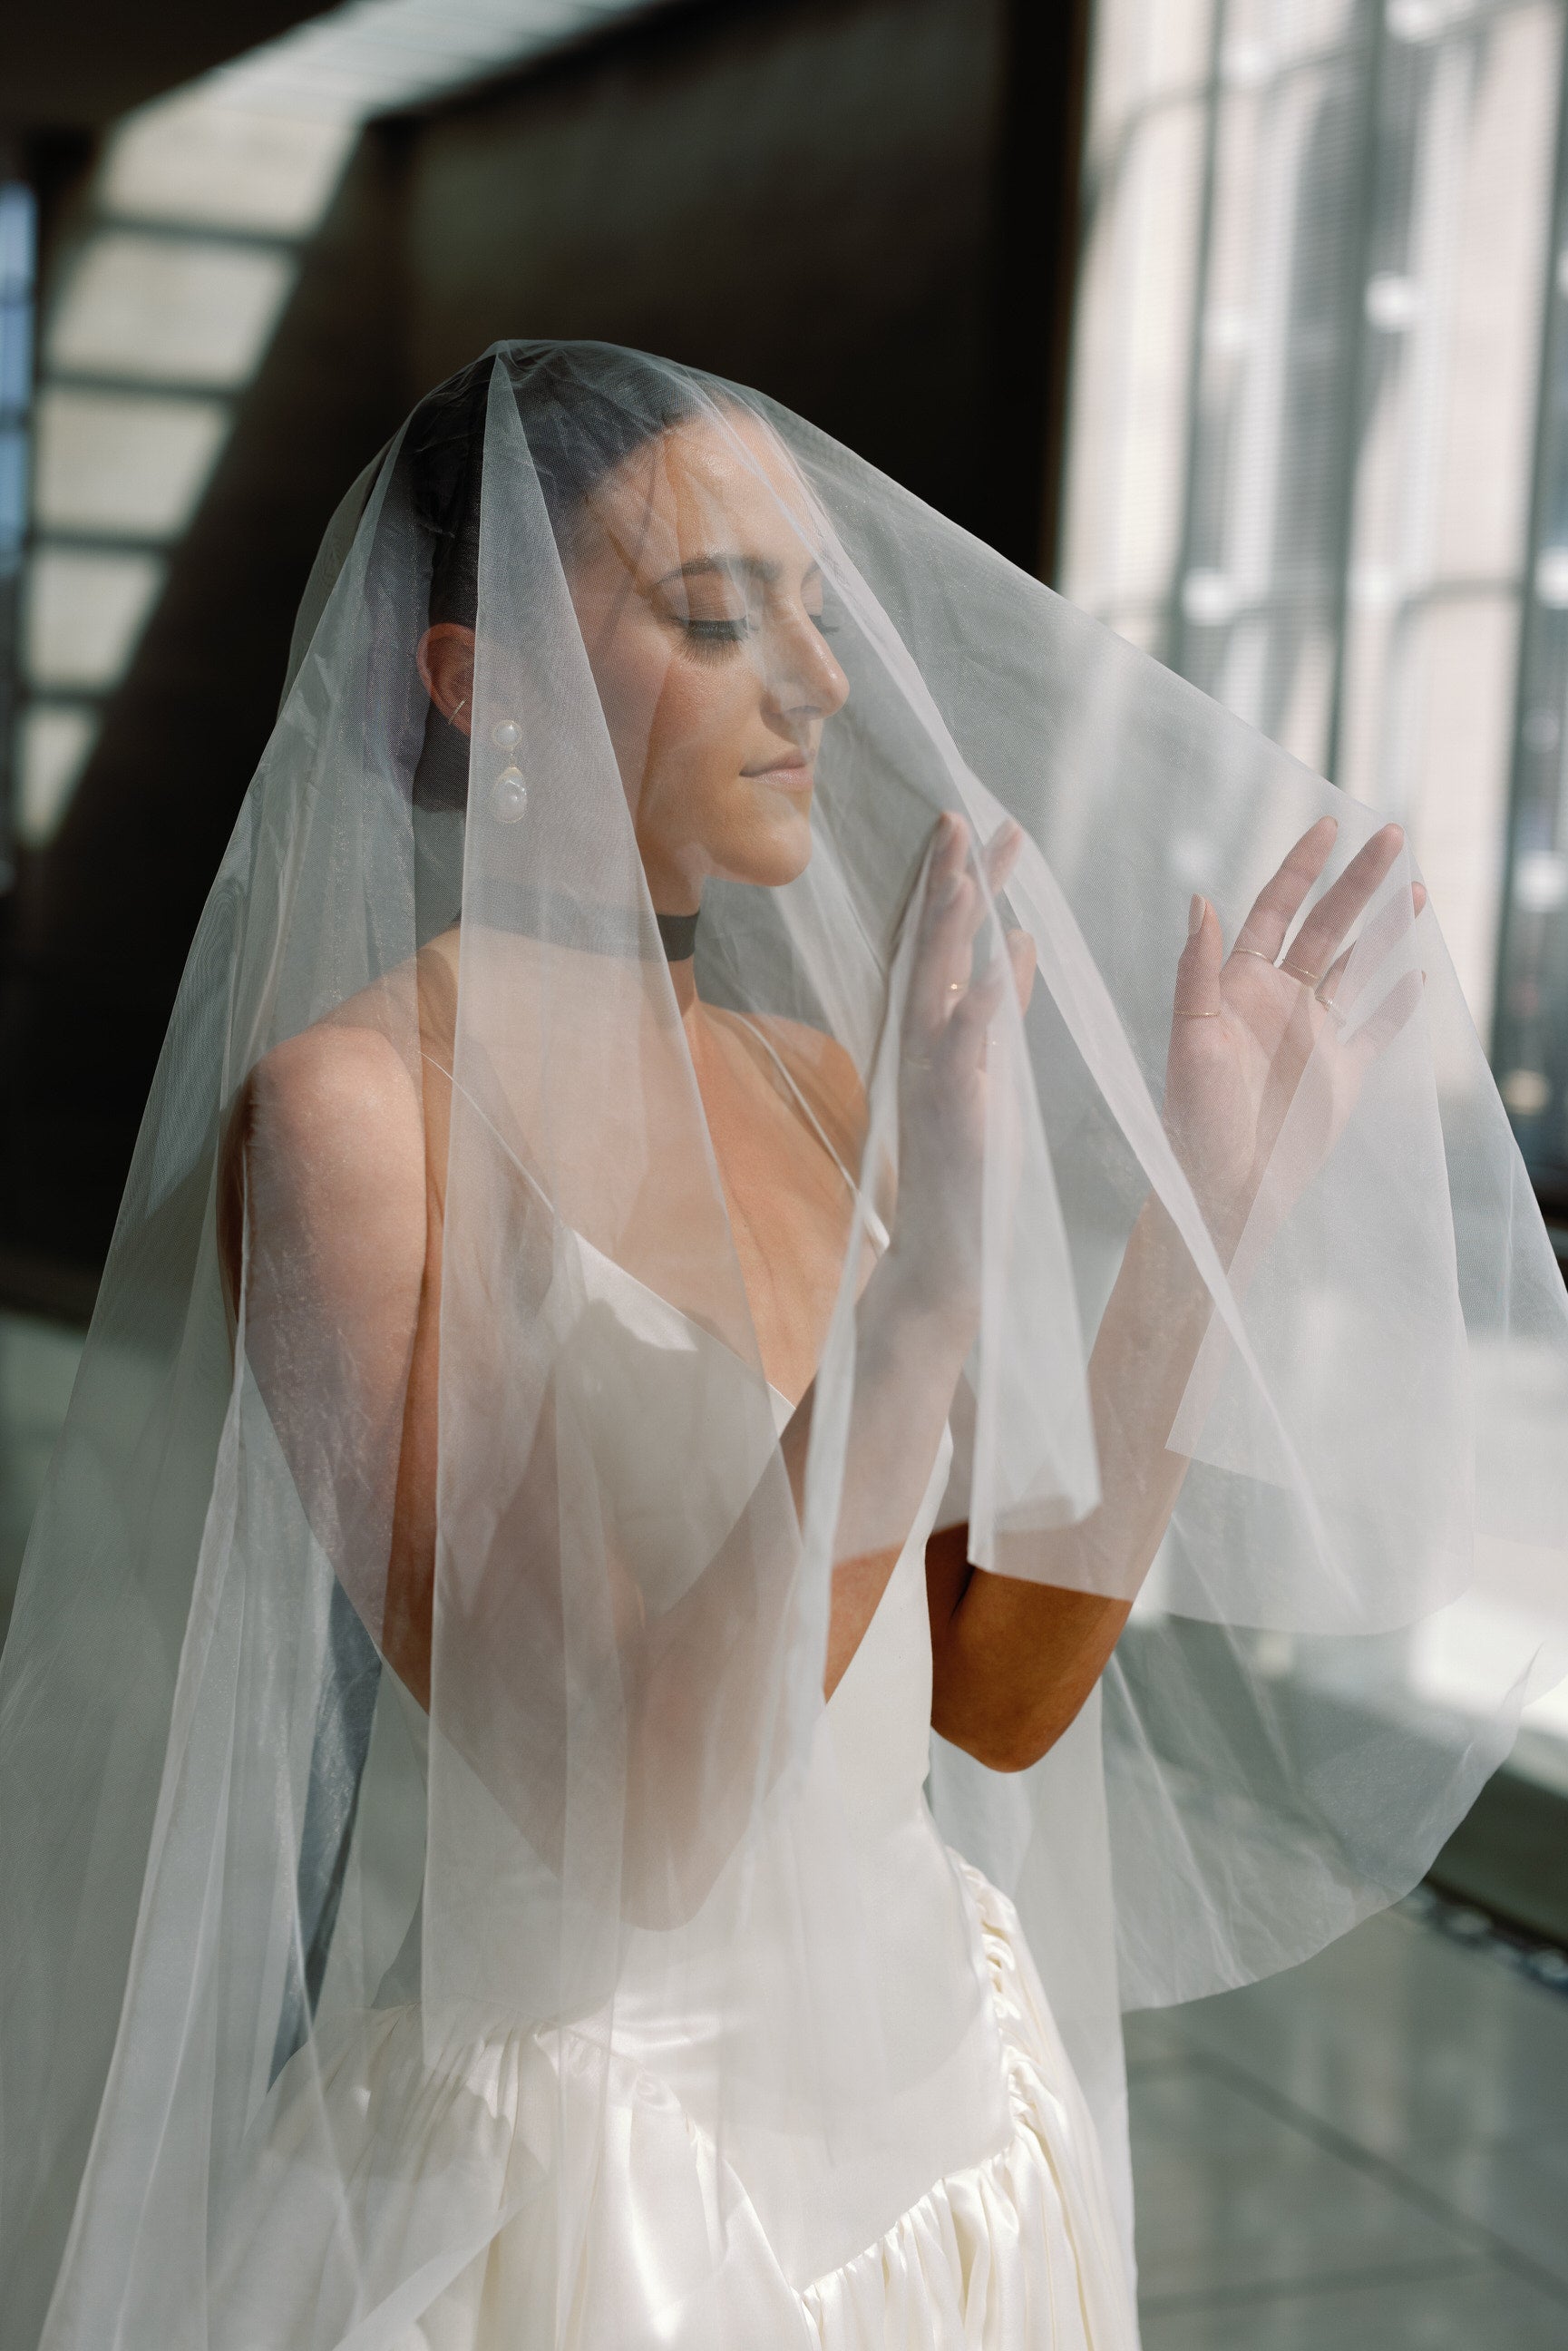 Sheer Simple Single Tier Wedding Veil, Chapel & Cathedral Lengths  Available, Soft Tulle 